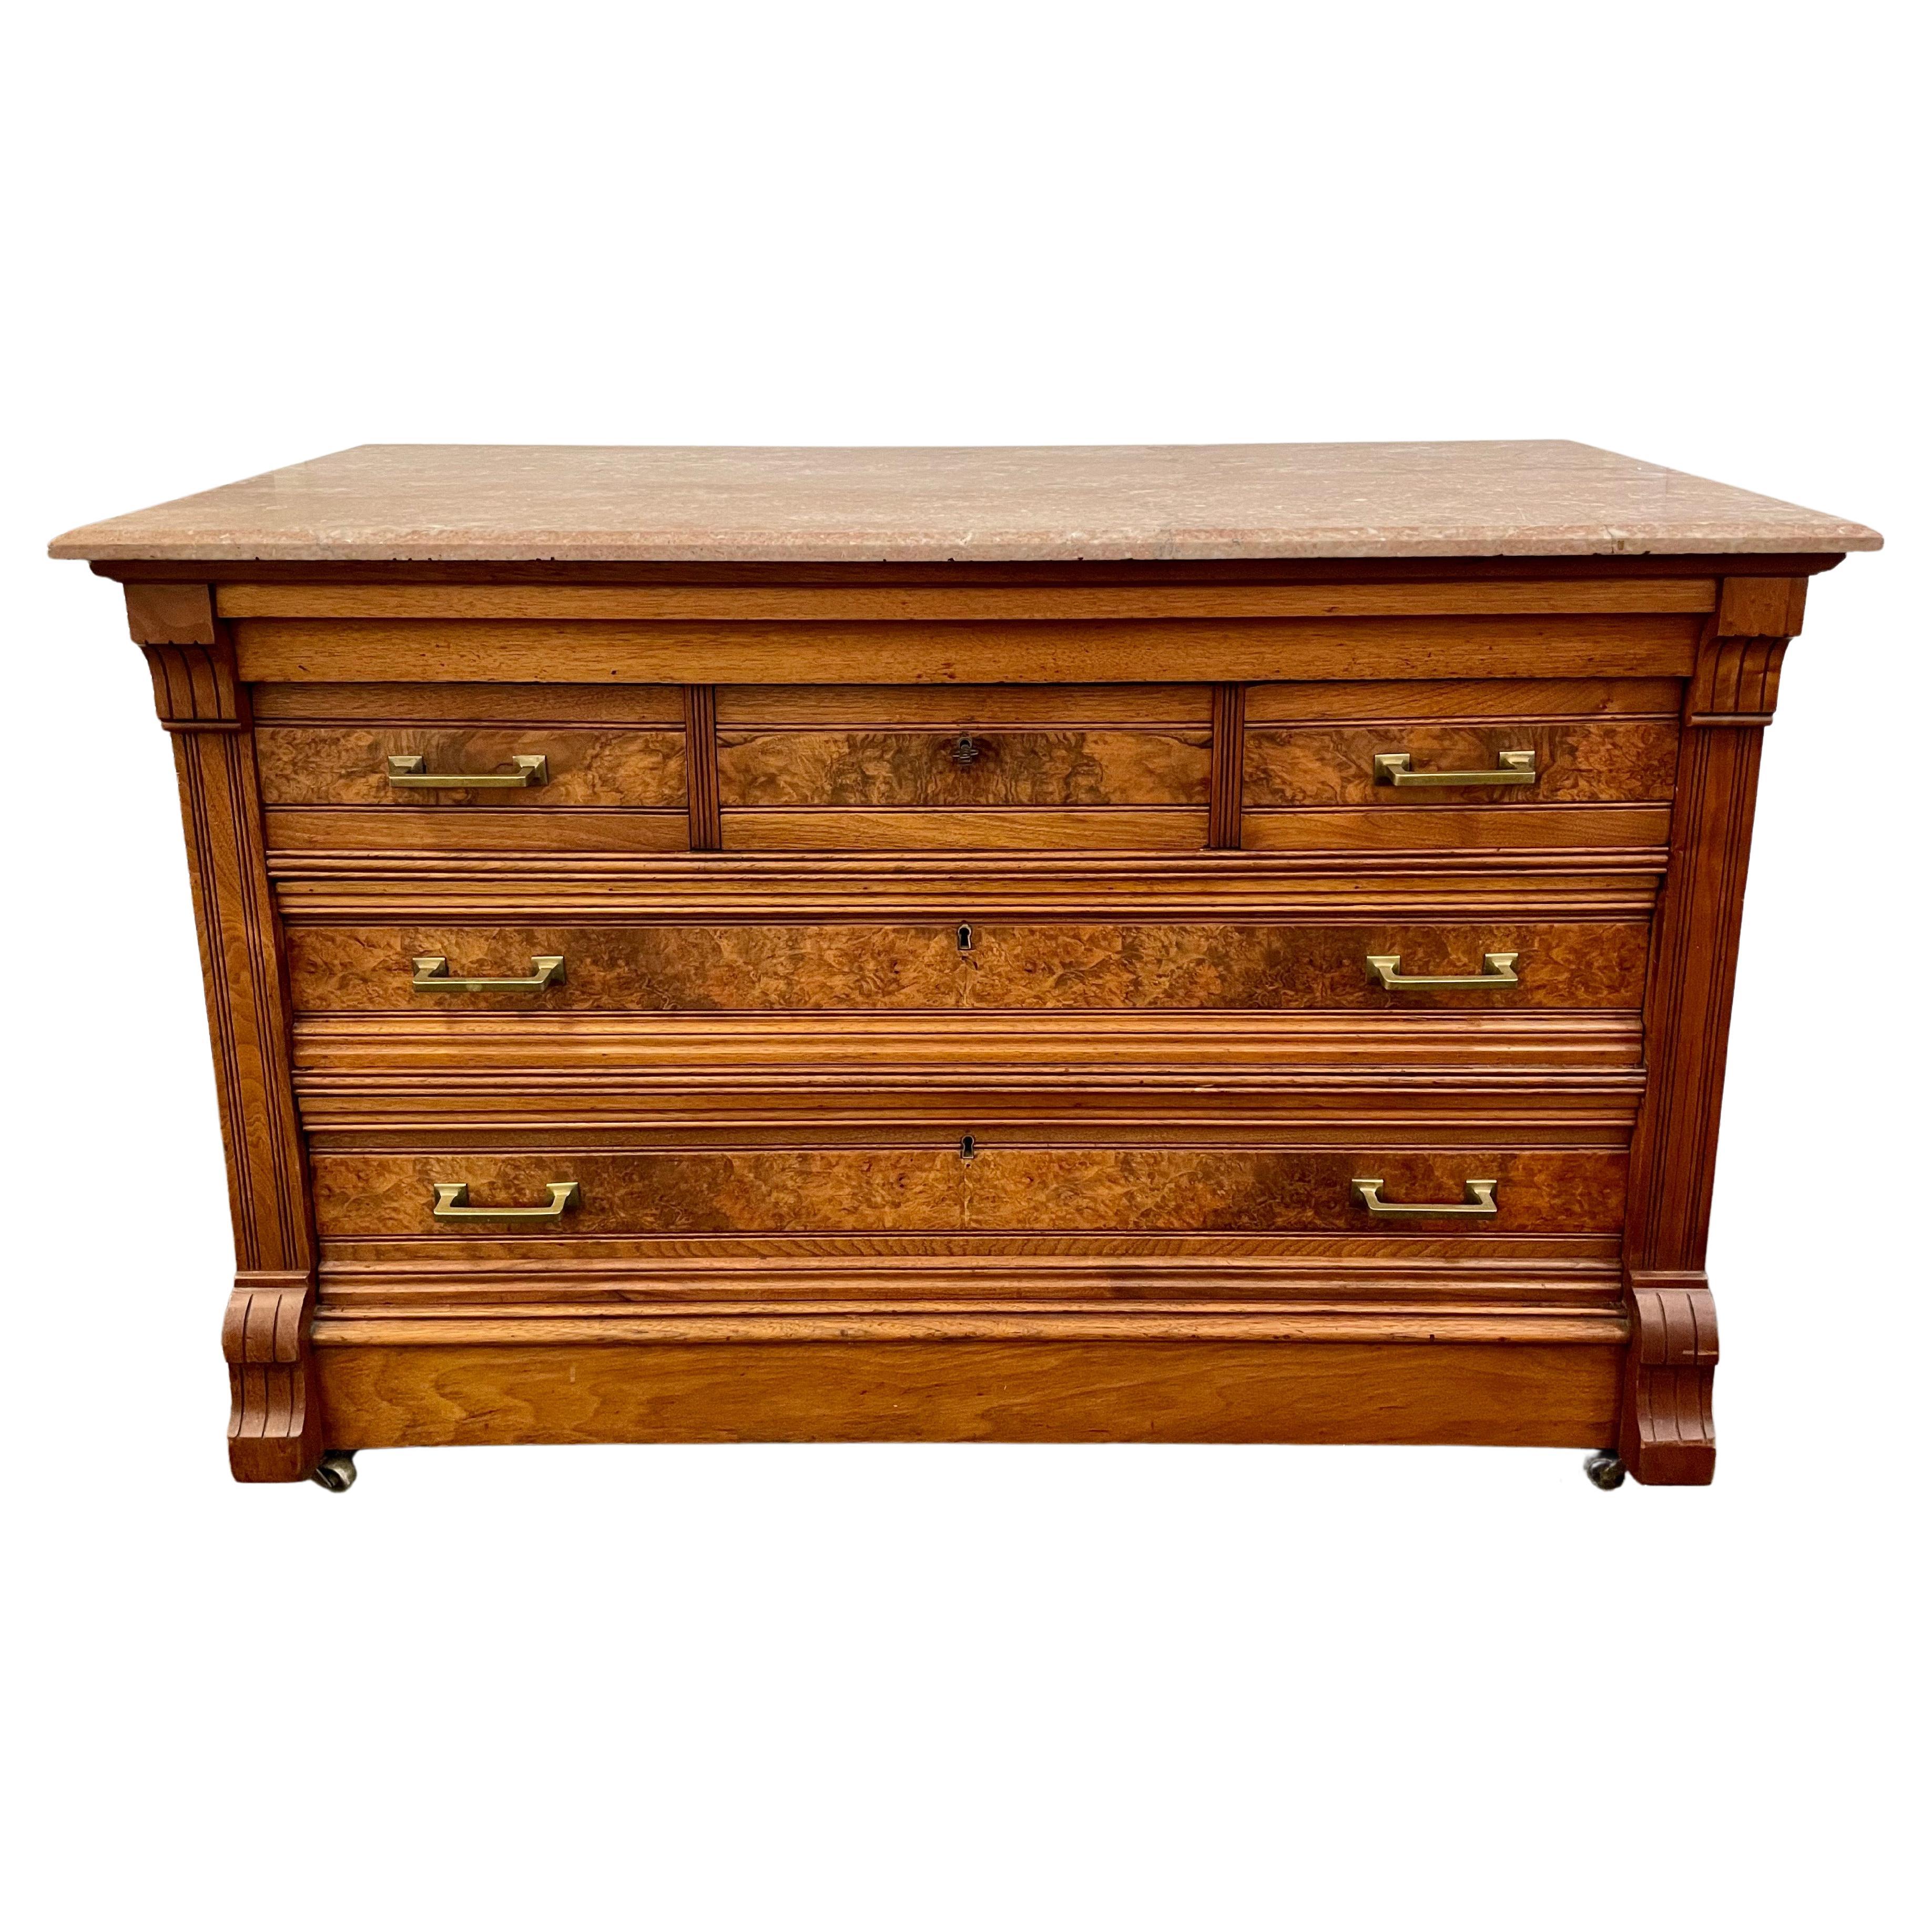 Antique Italian Mahogany & Burl Wood Commode with Verona Rosso Marble Top For Sale